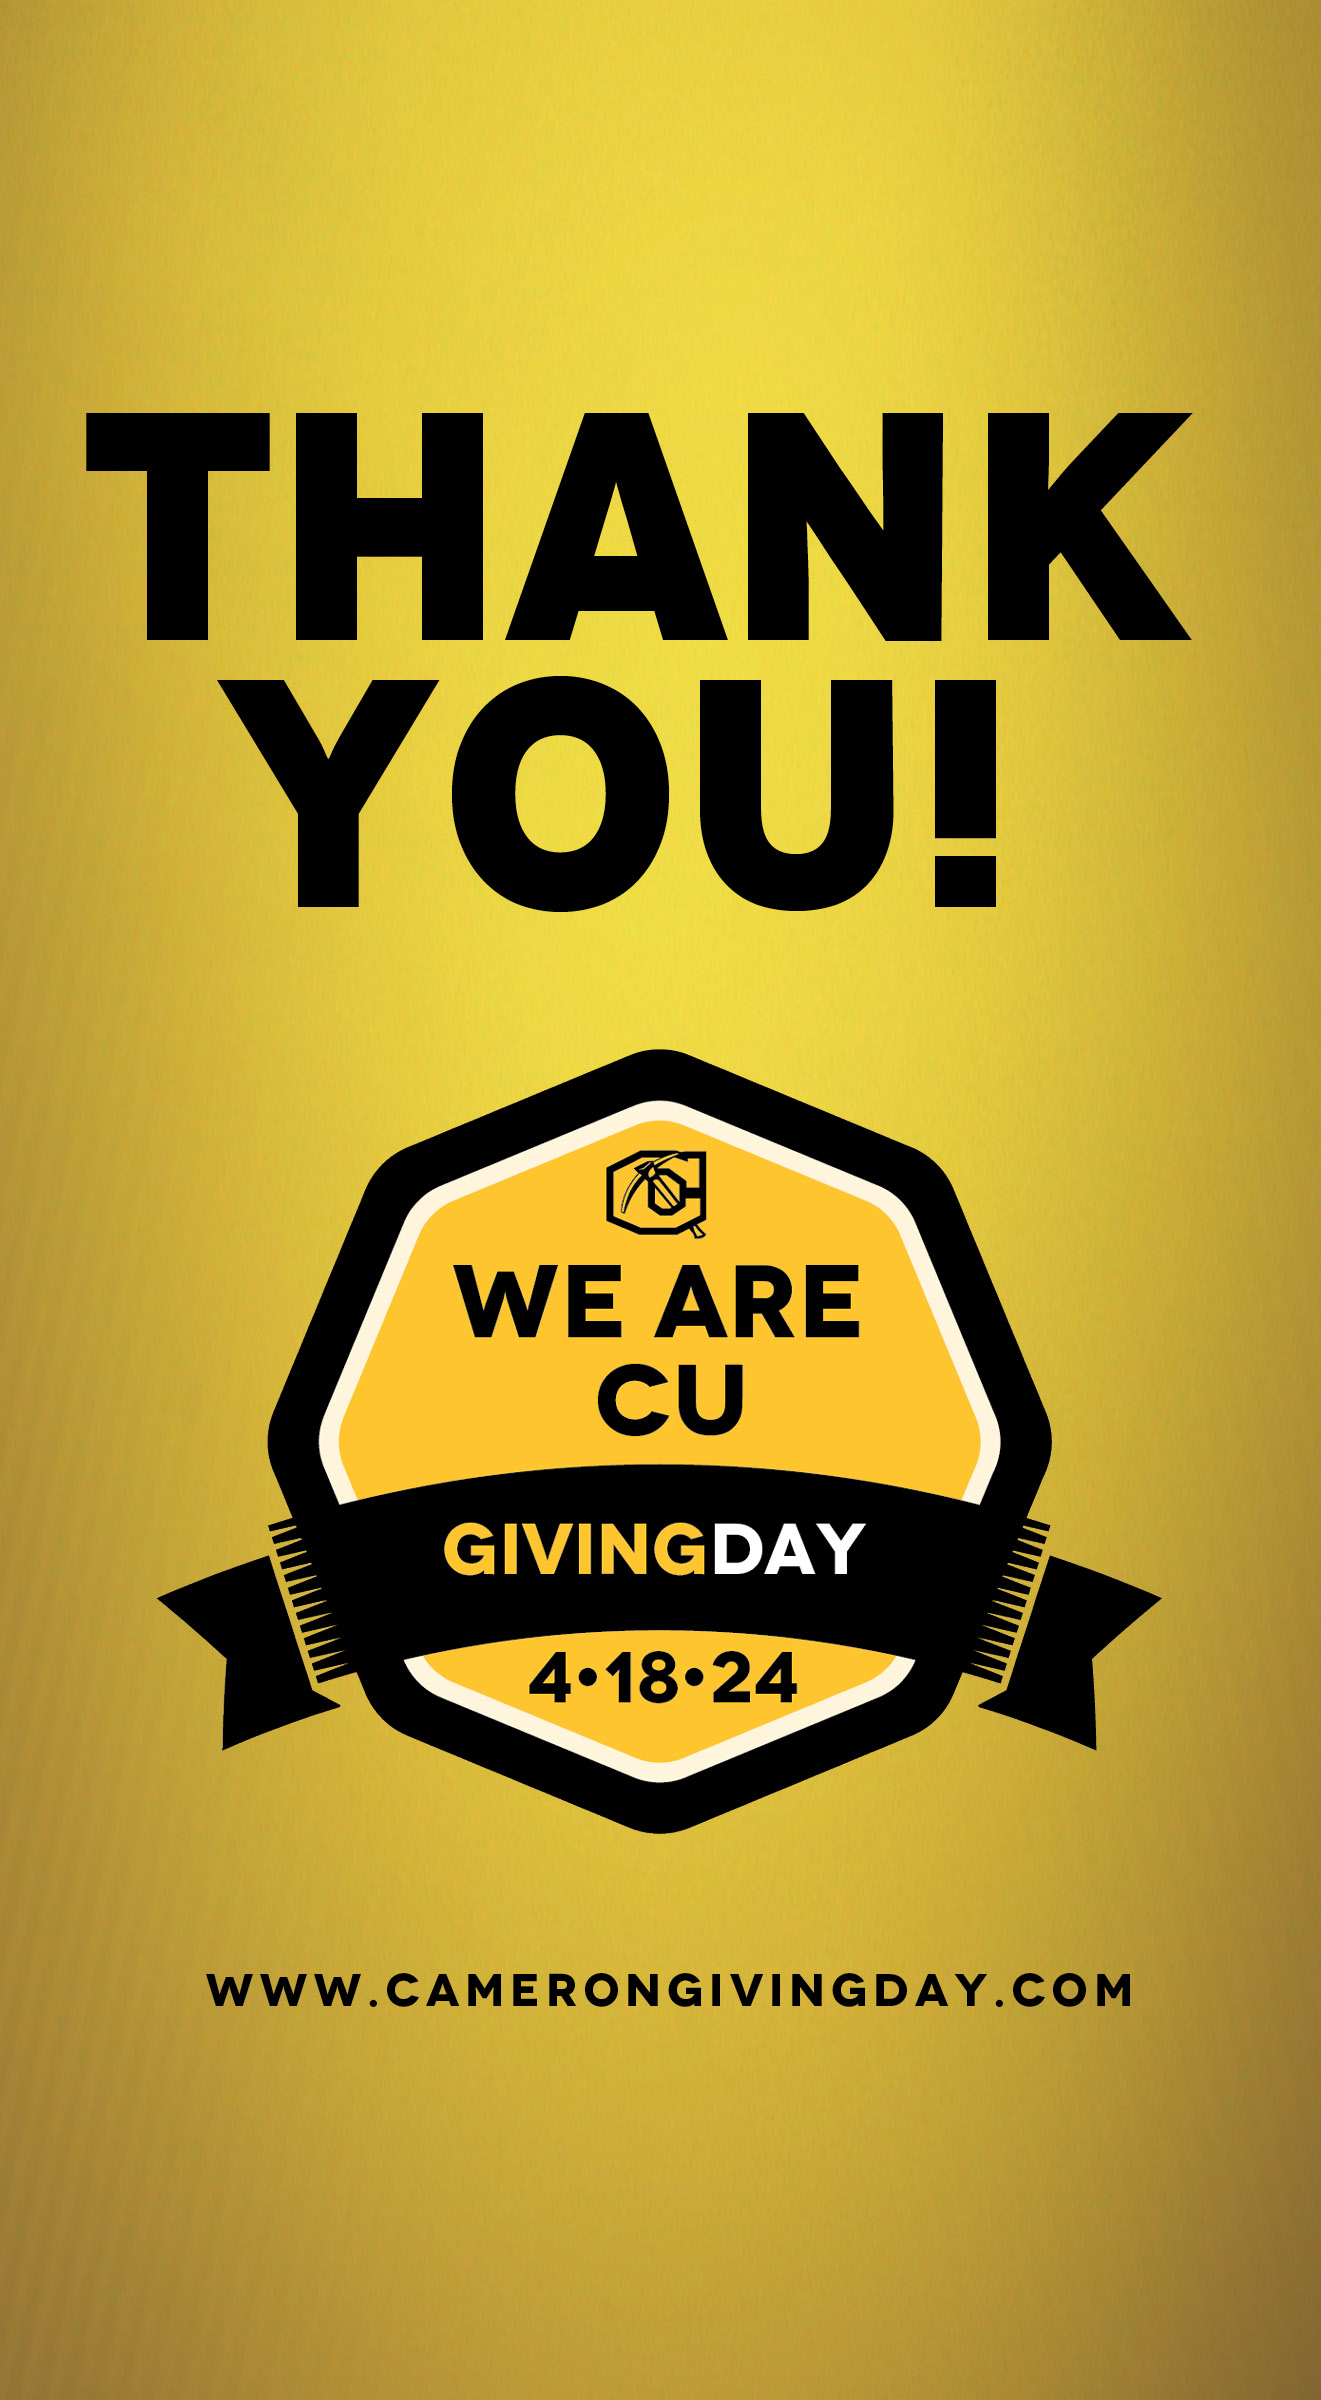 Thank you. We Are CU Giving Day 4.18.24.  www.camerongivingday.com